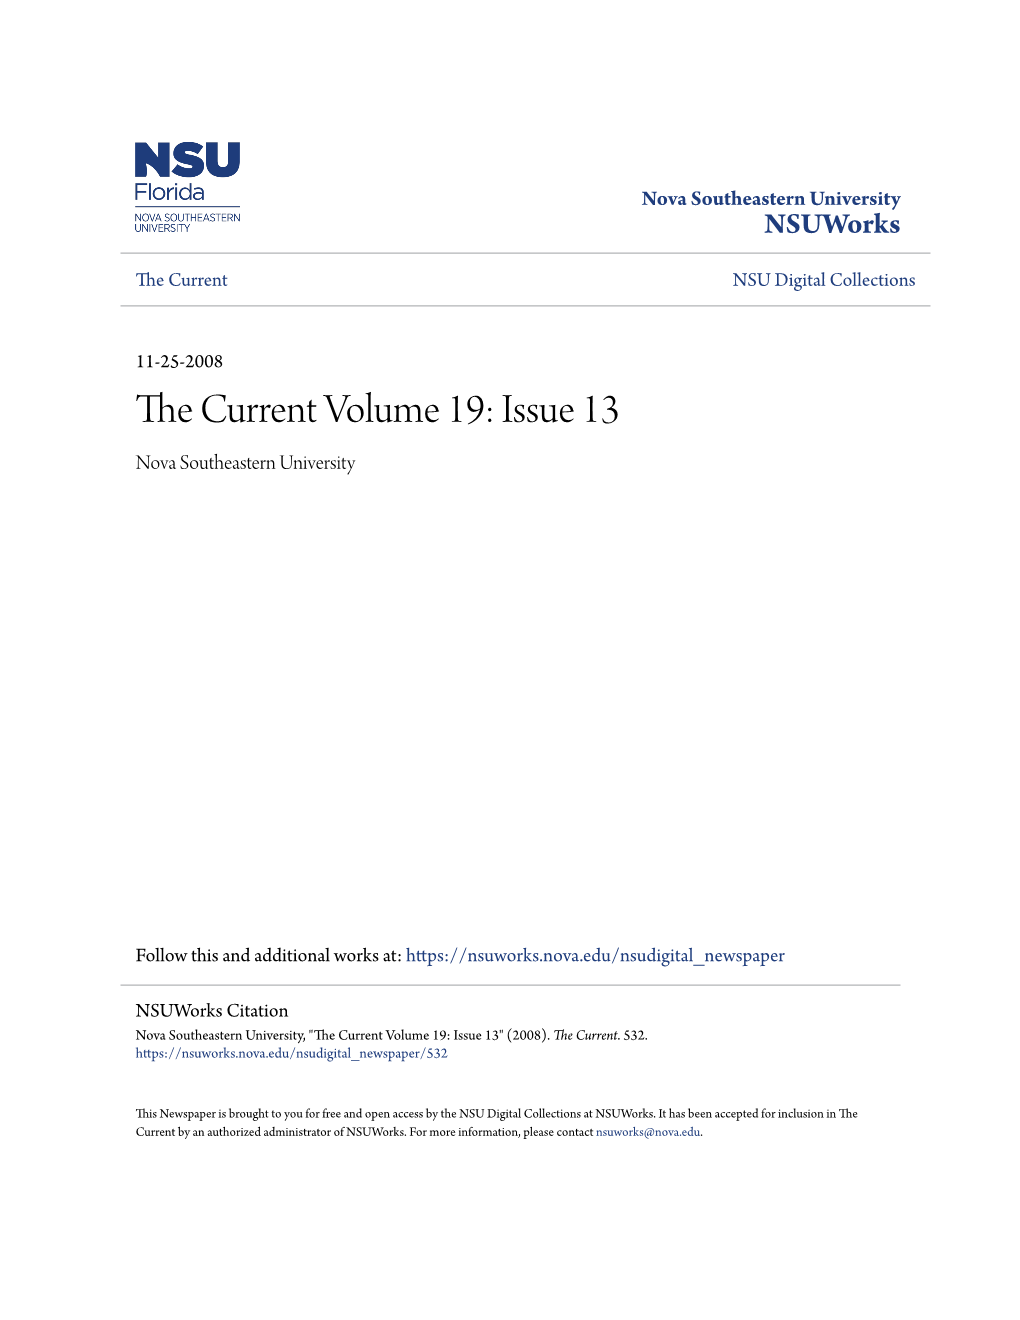 The Current Volume 19: Issue 13